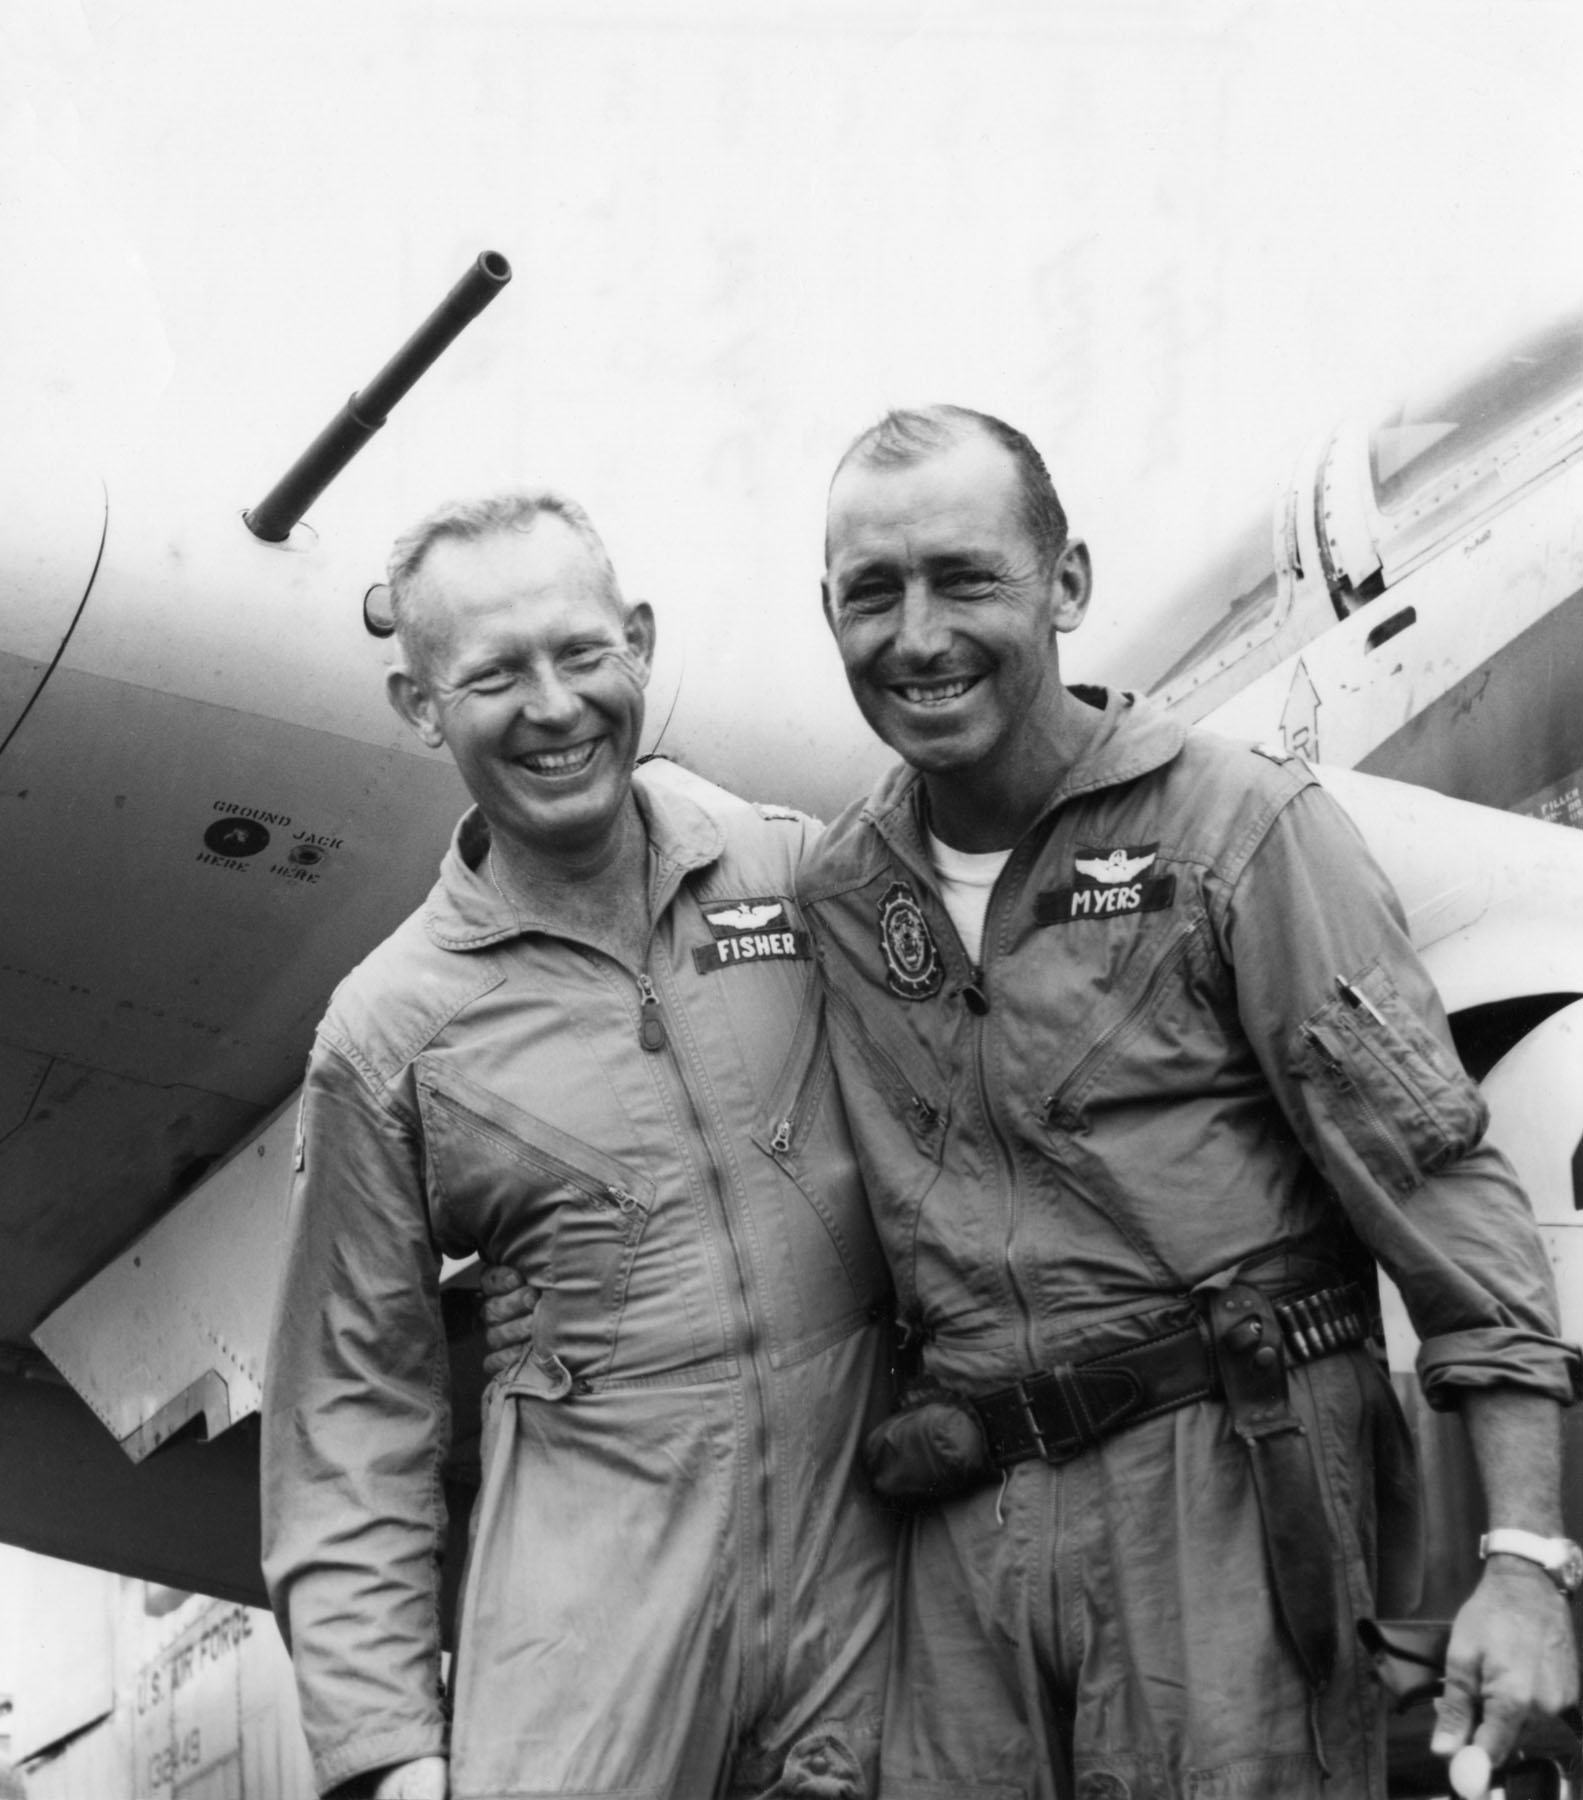 Major Bernard F. Fisher, United States Air Force, with D.W. Myers, 10 March 1966. (U.S. Air Force)